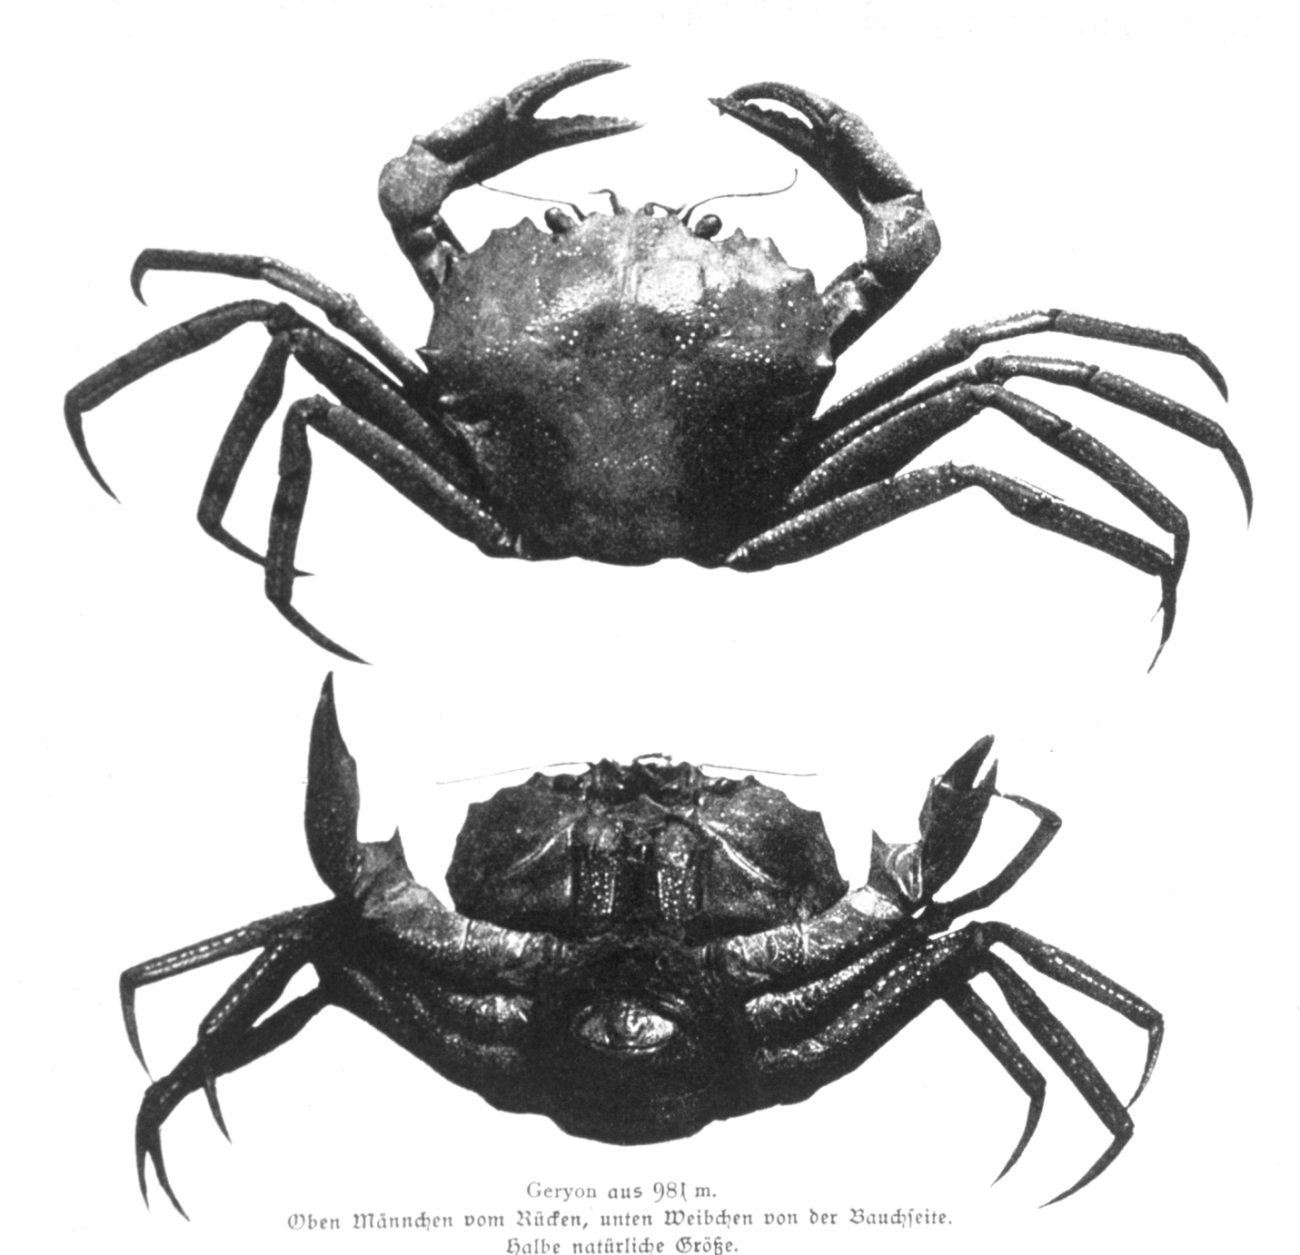 Crabs captured at 981 meters at 25 Degrees south Latitude in the southAtlantic